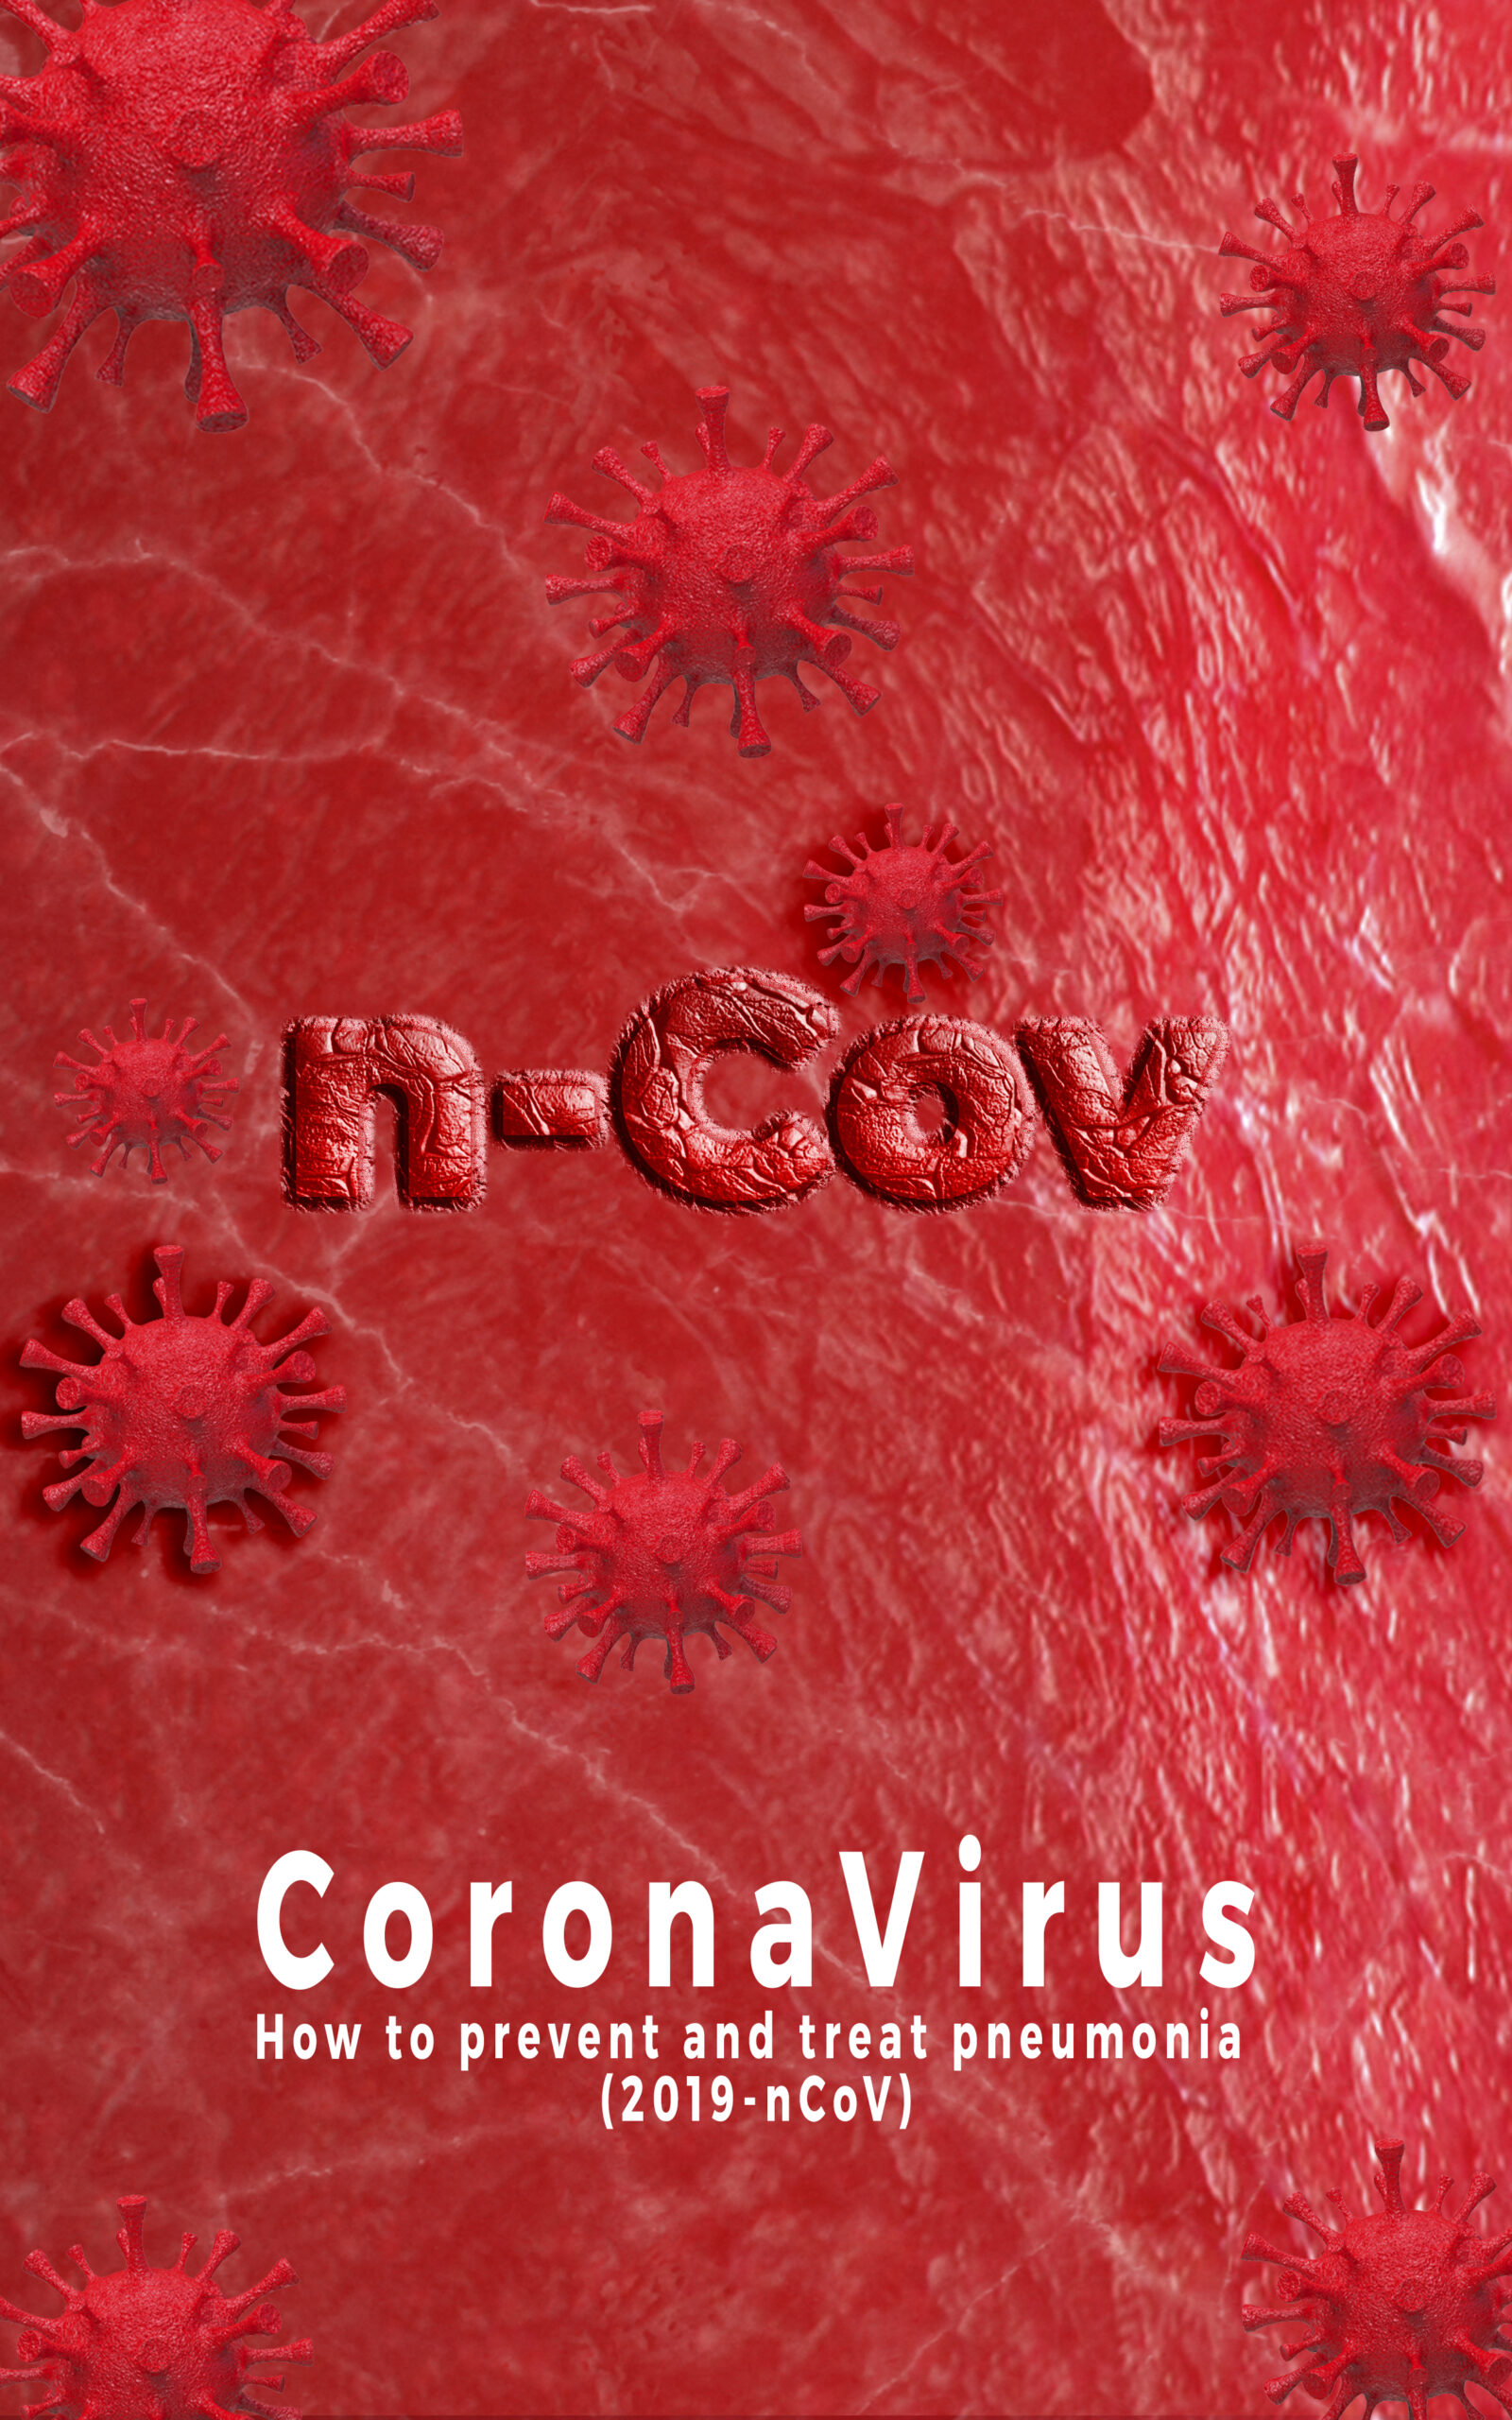 FREE: CoronaVirus: How best protect yourself ? – What are the symptoms of 2019-nCoV? – Wear medical masks to prevent coronavirus: Typical symptoms and preventation of by Joseph Son